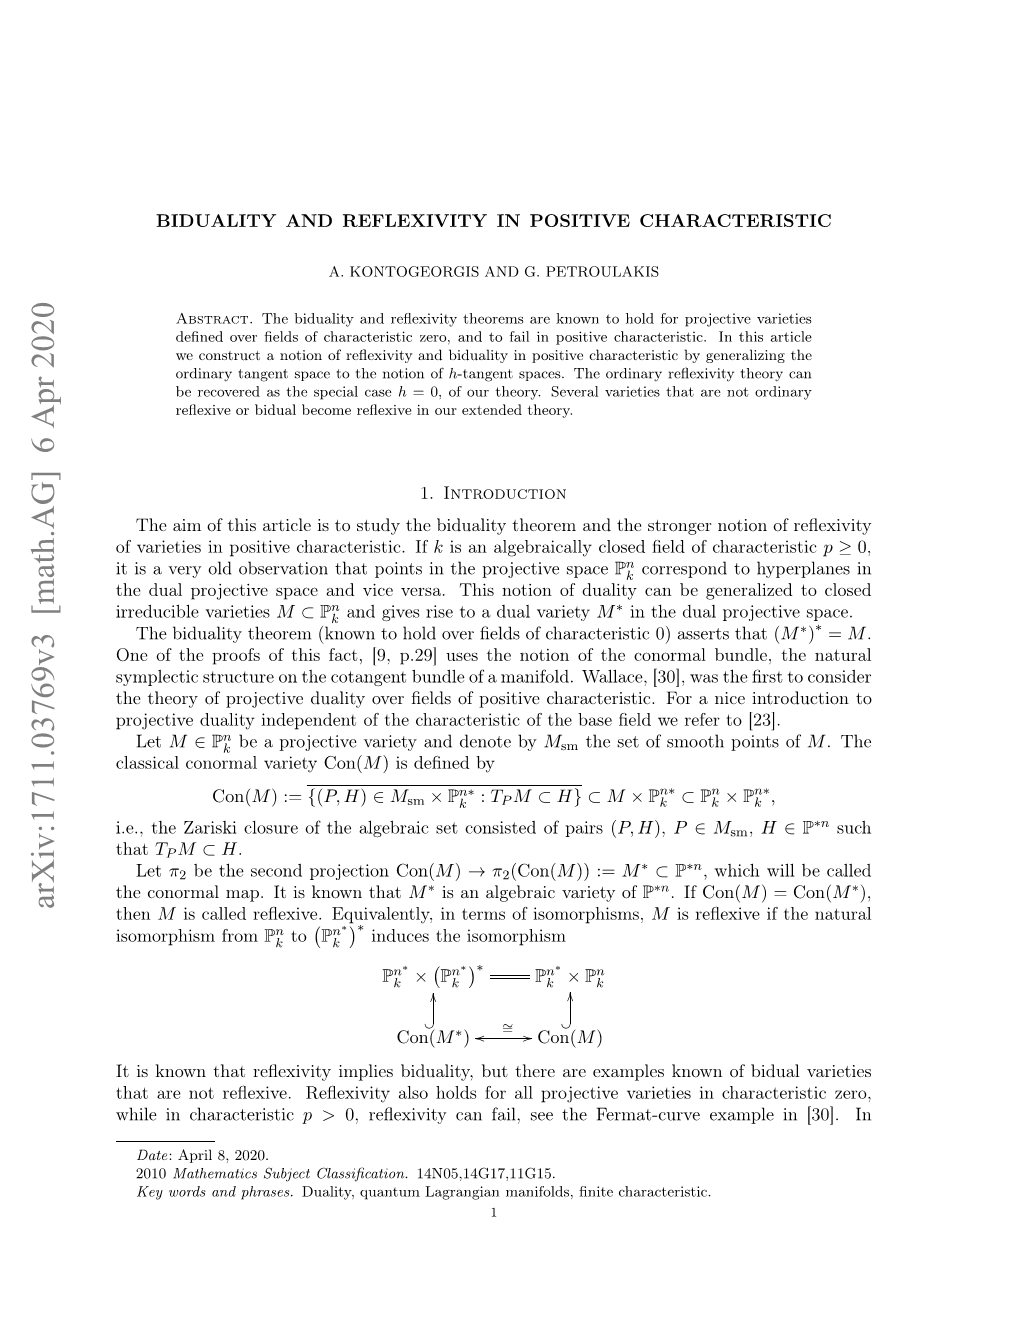 Biduality and Reflexivity in Positive Characteristic 3